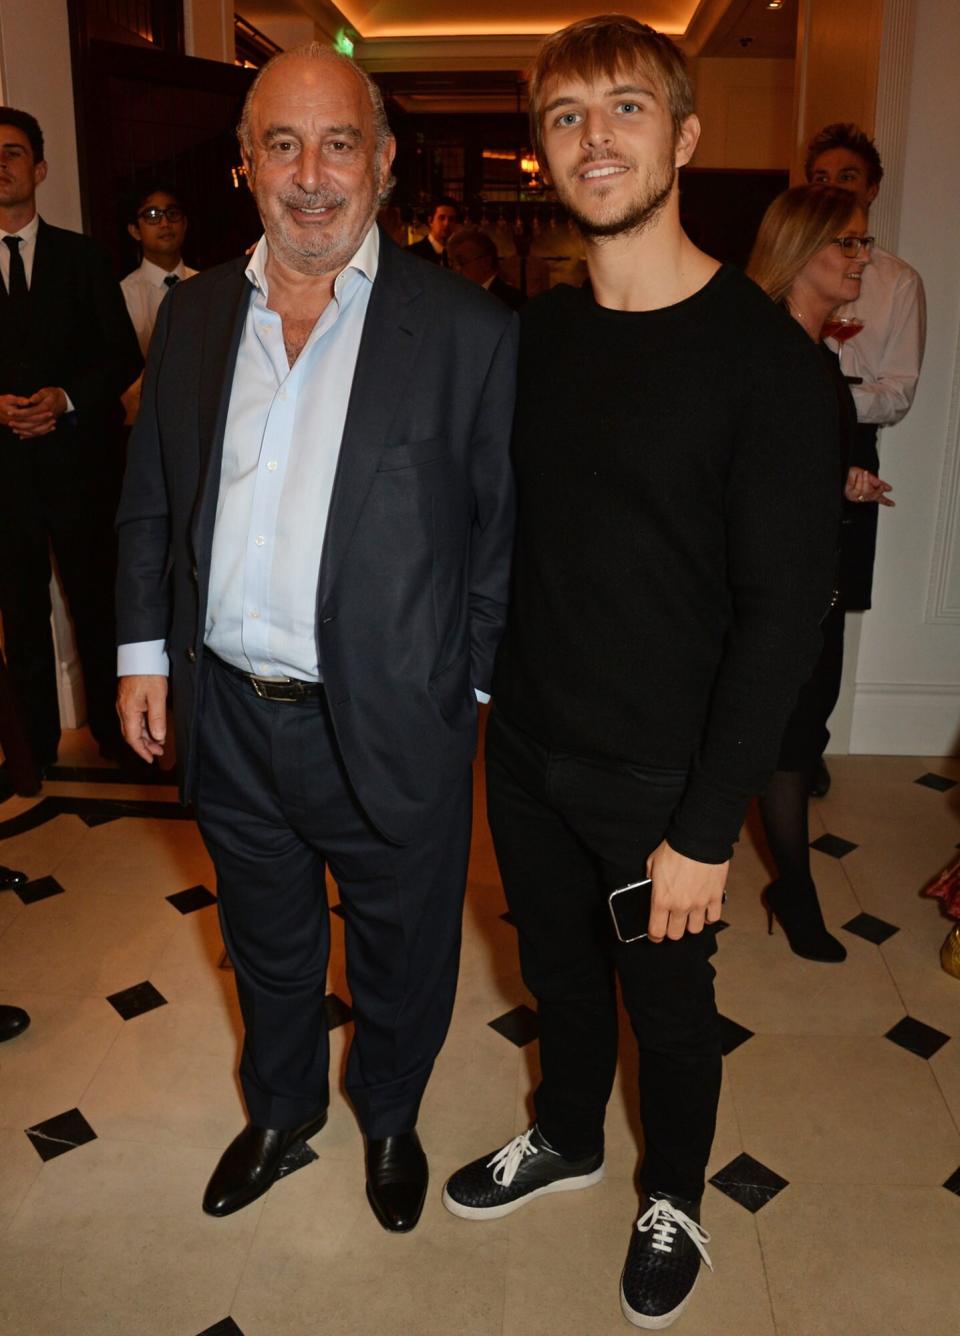 Sir Philip Green (L) and Brandon Green attend an event hosted by Naomi Campbell, Burberry and TASCHEN to celebrate the launch of 'Naomi'